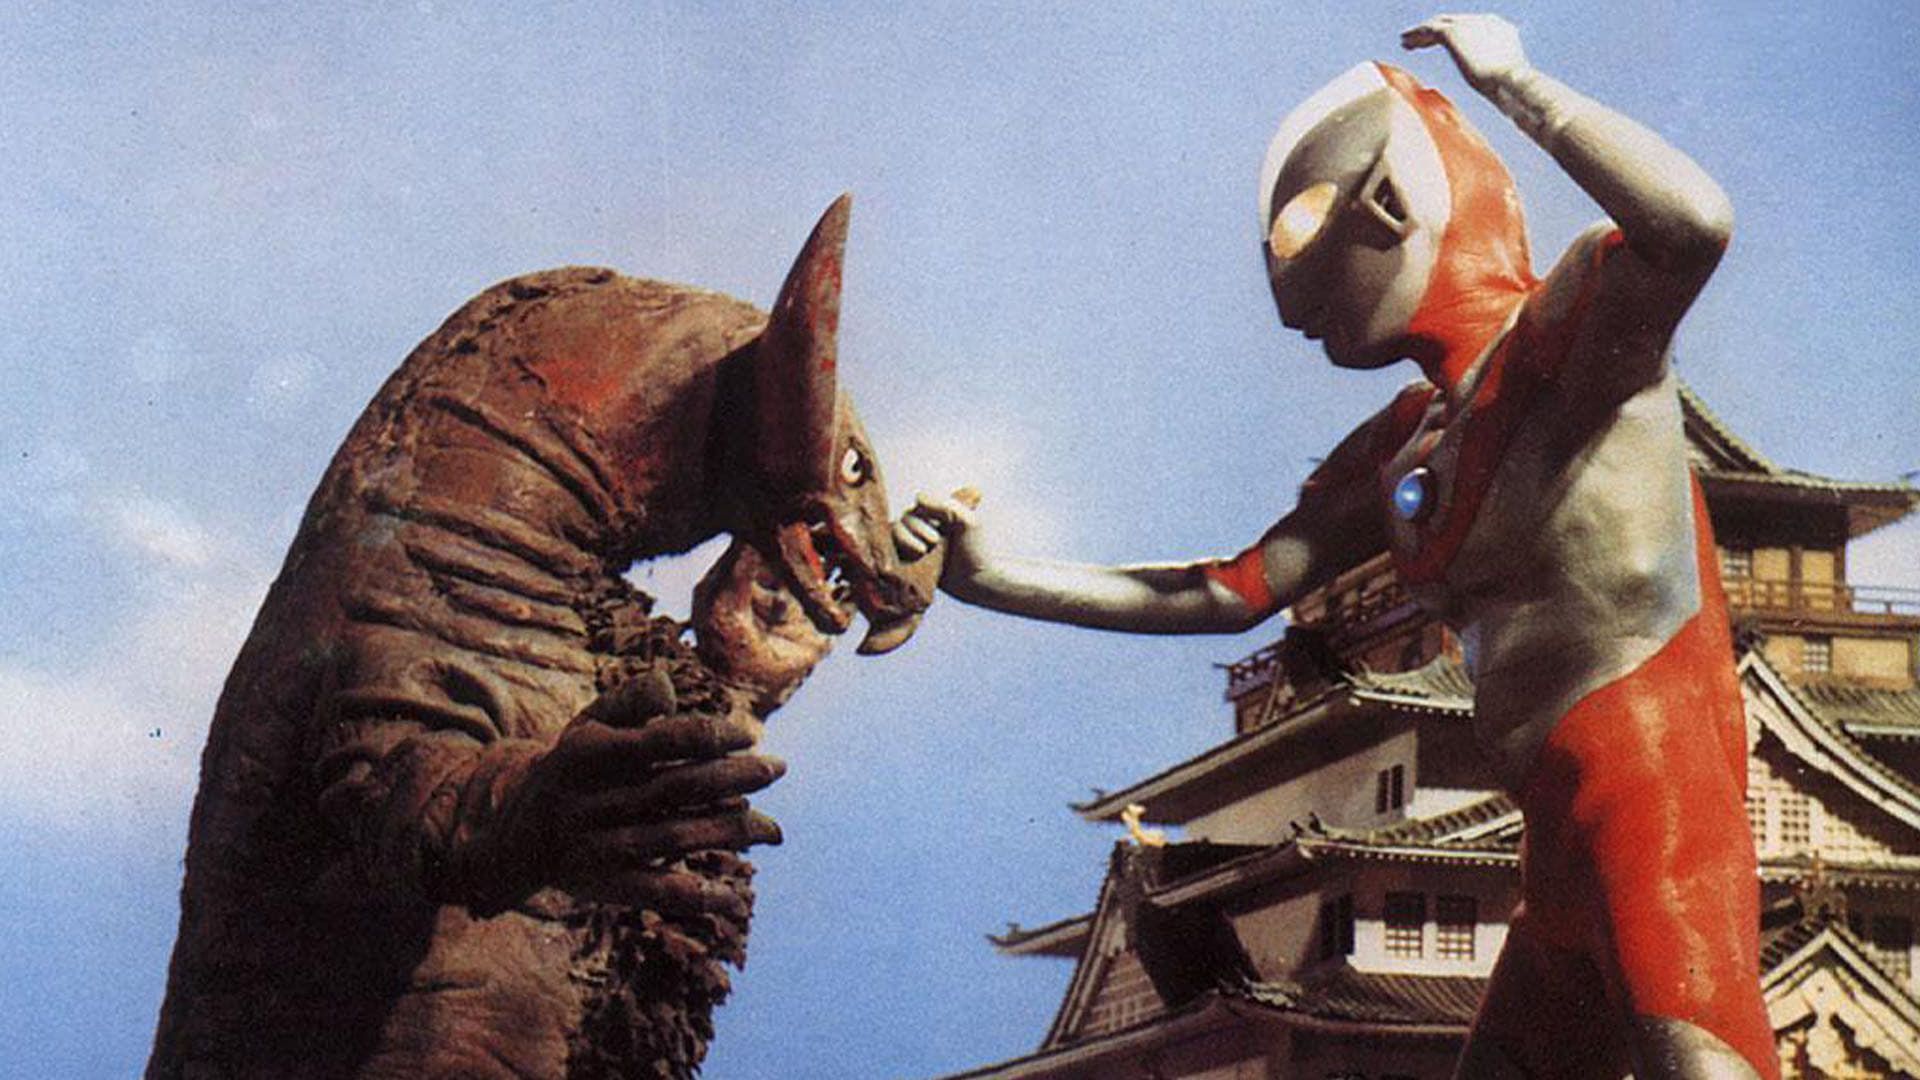 Ultraman: A Special Effects Fantasy Series Backdrop